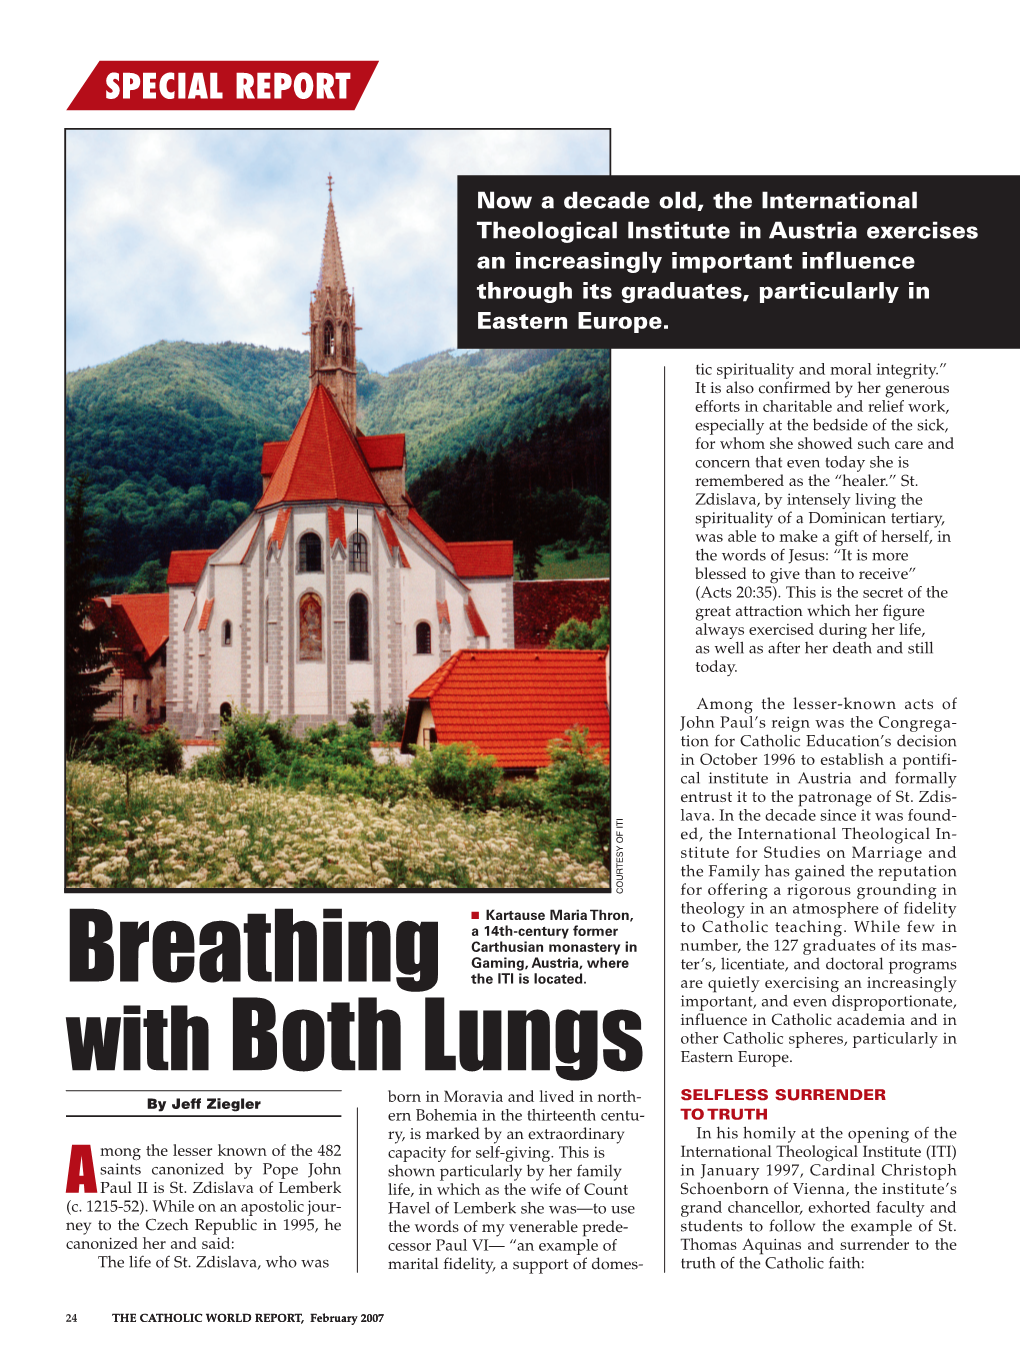 Breathing with Both Lungs